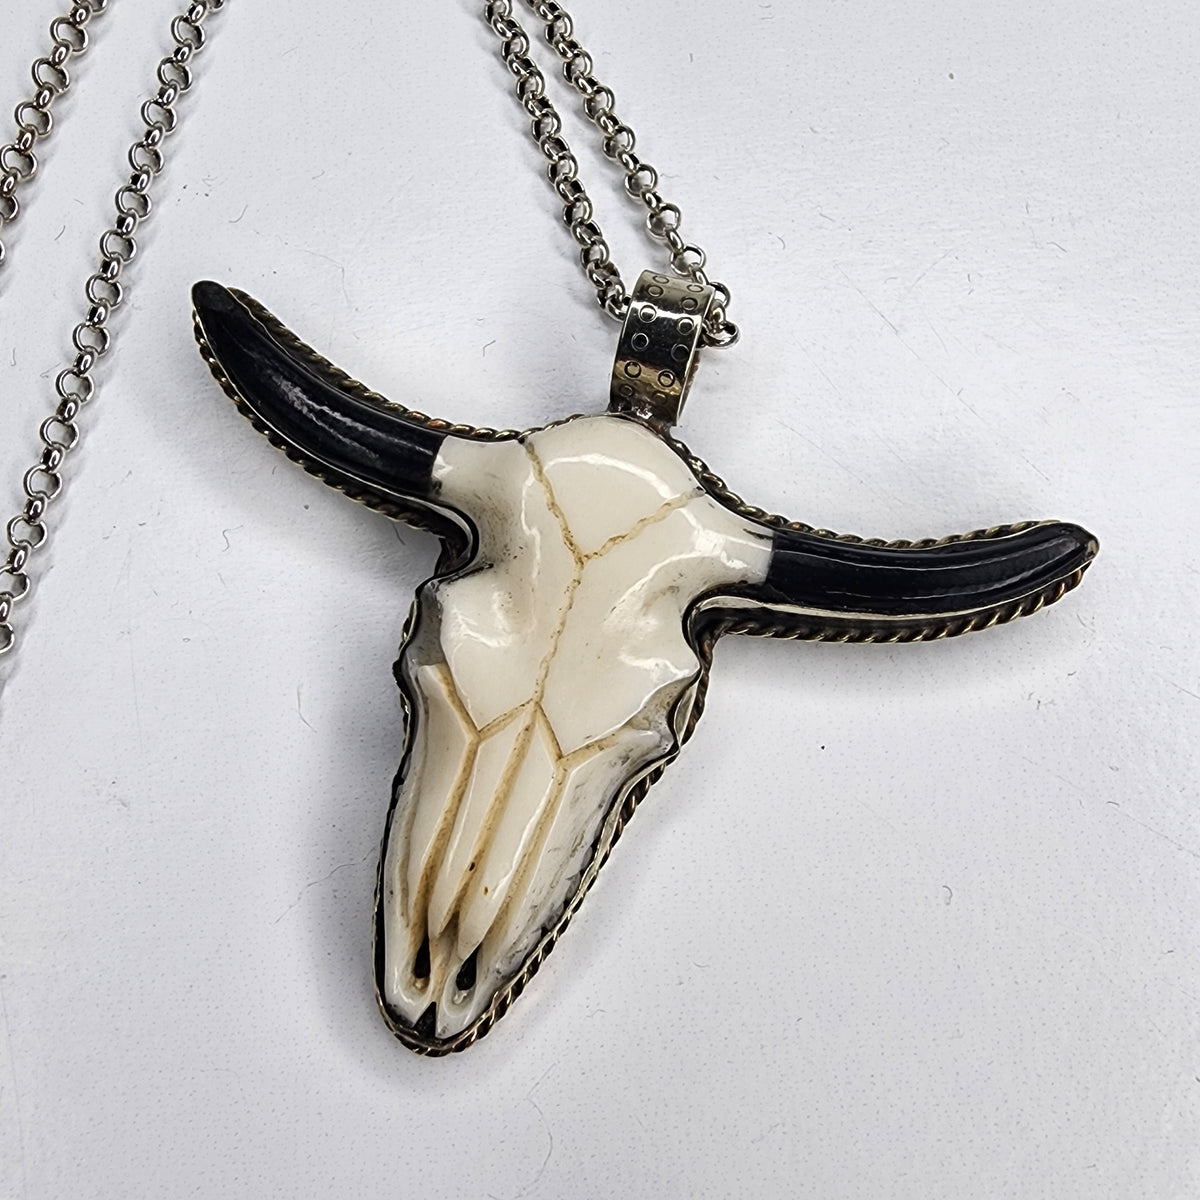 Carved Bull Pendant on Sterling Silver Chain